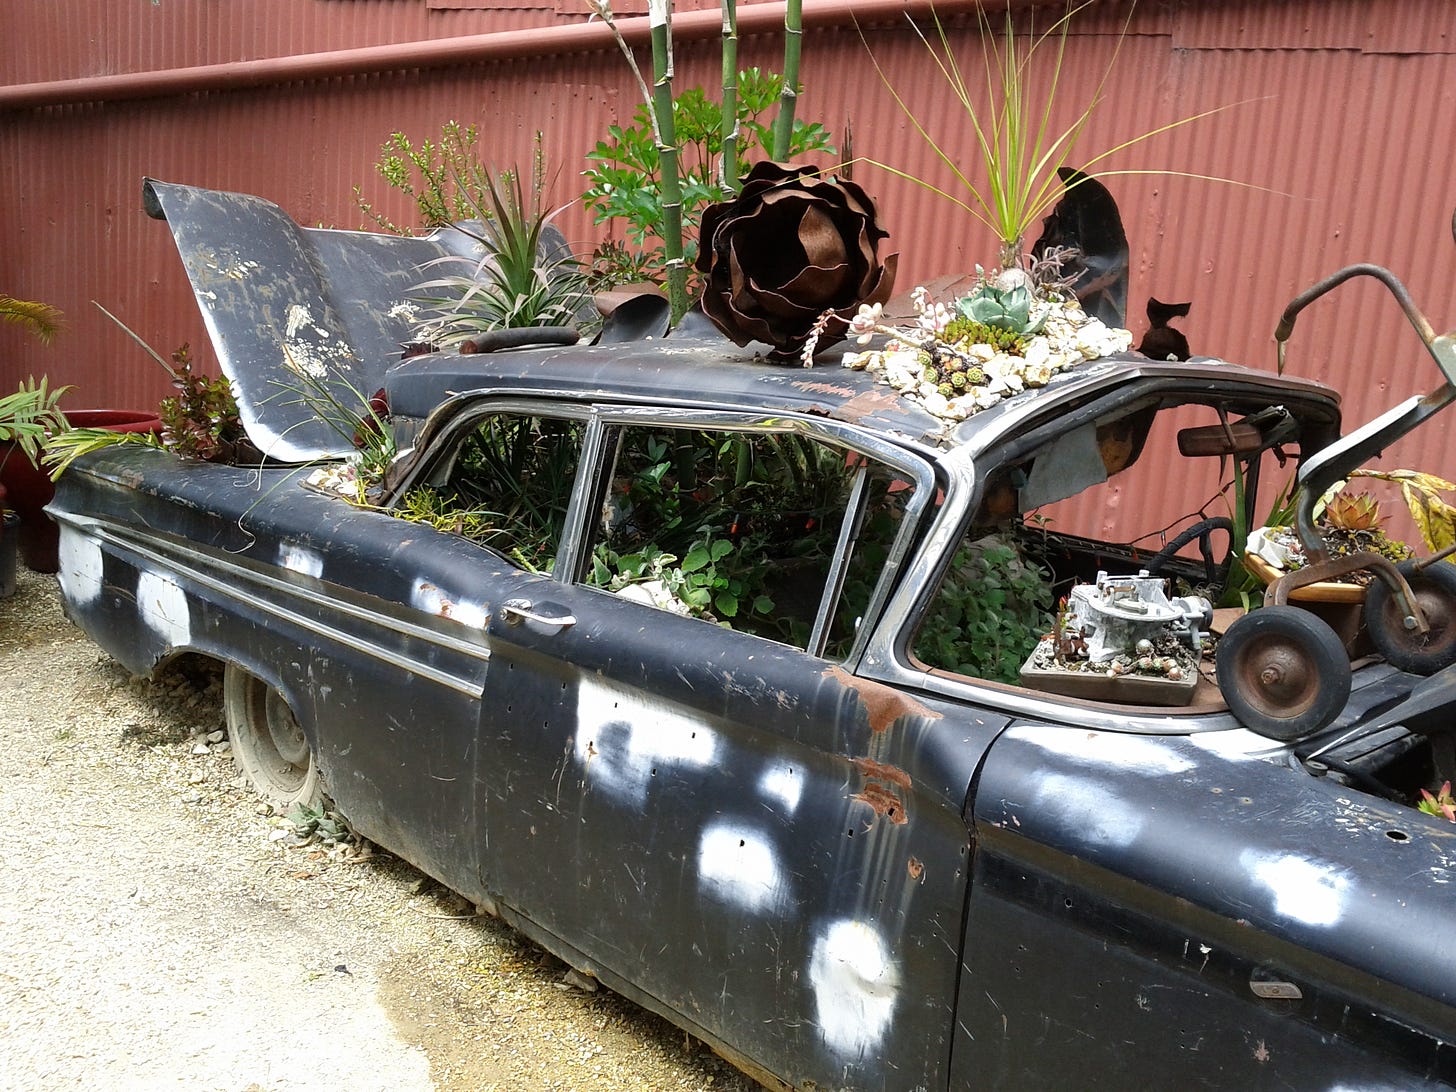 Car pretending to be a planter; plants growing from its roof, engine, seats, and trunk.